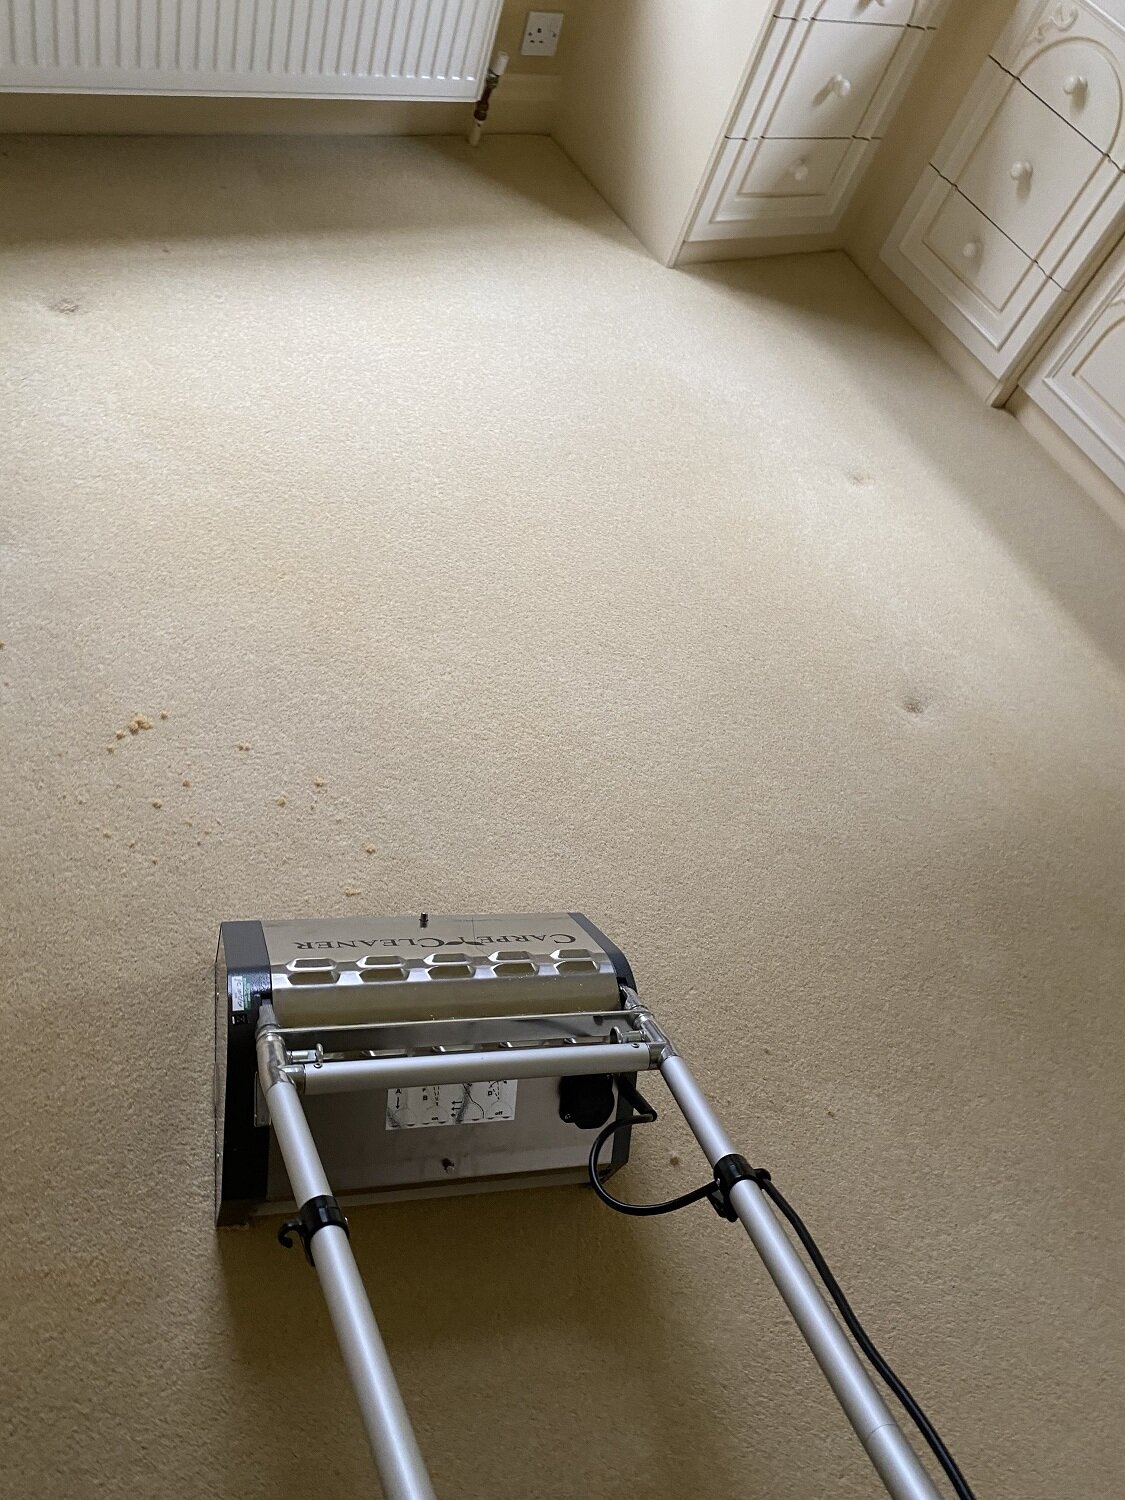 Low Moisture Carpet Cleaning in Grimsby and Cleethorpes